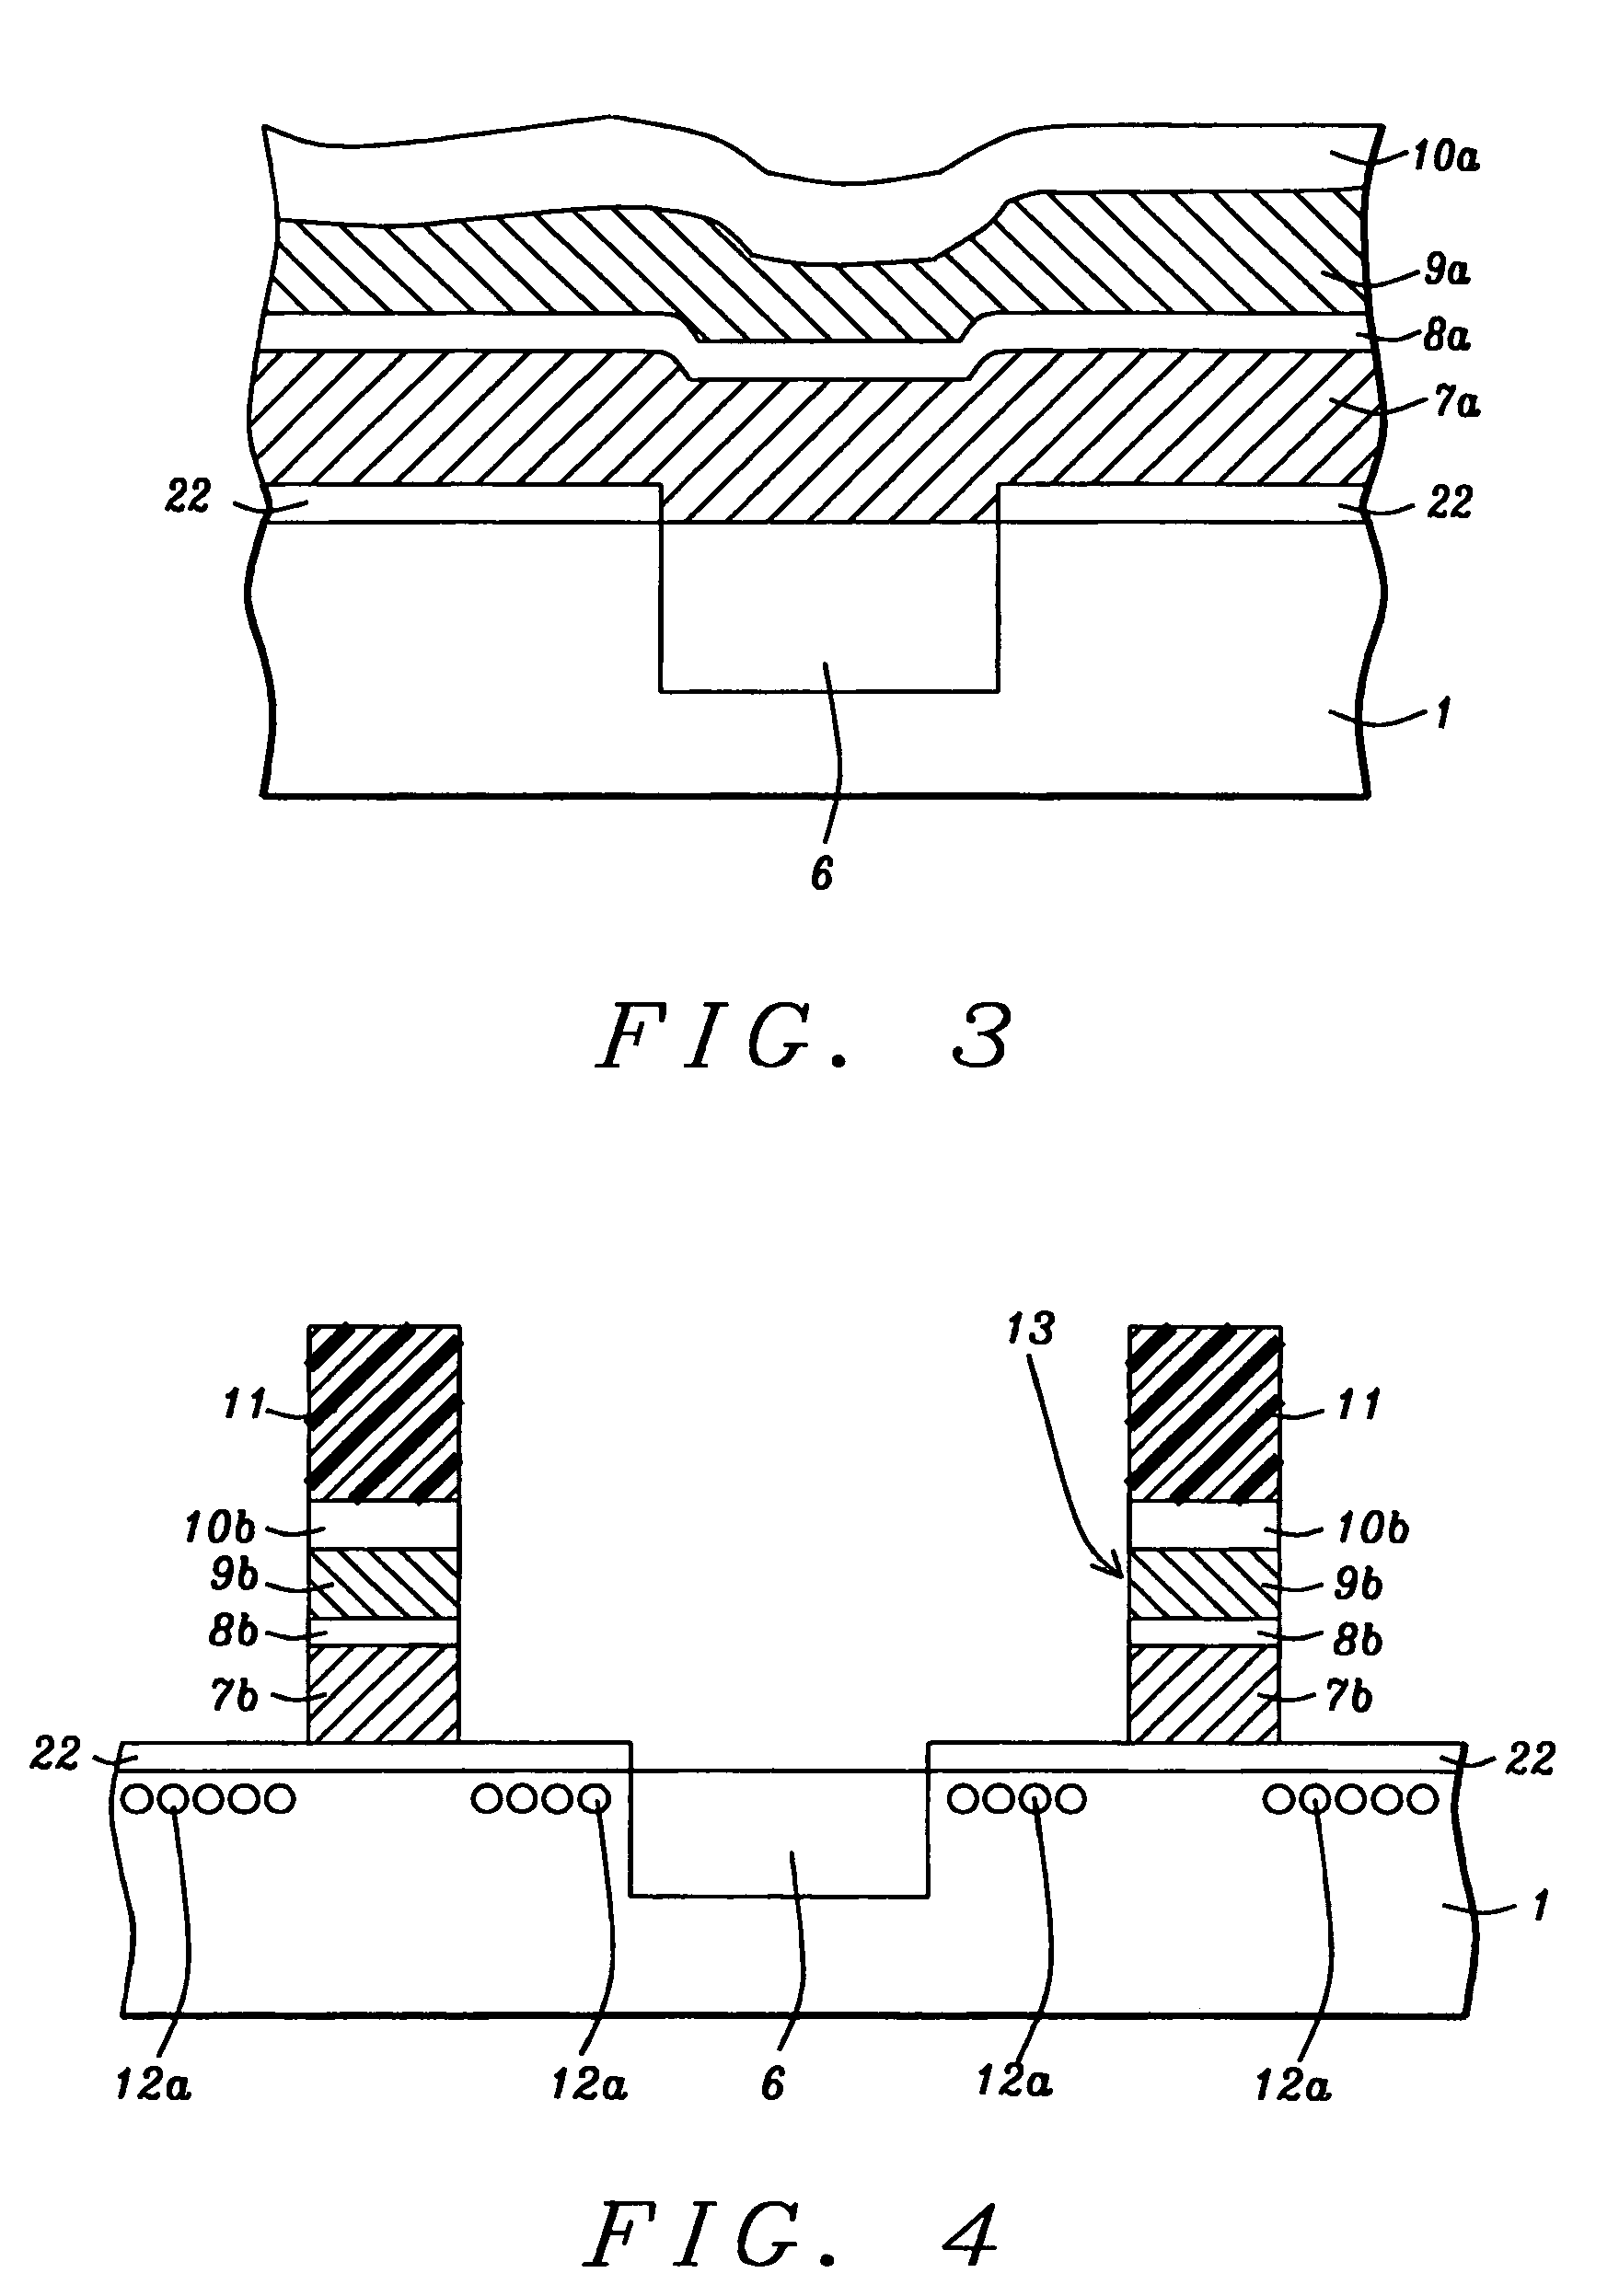 Method for passivation of plasma etch defects in DRAM devices